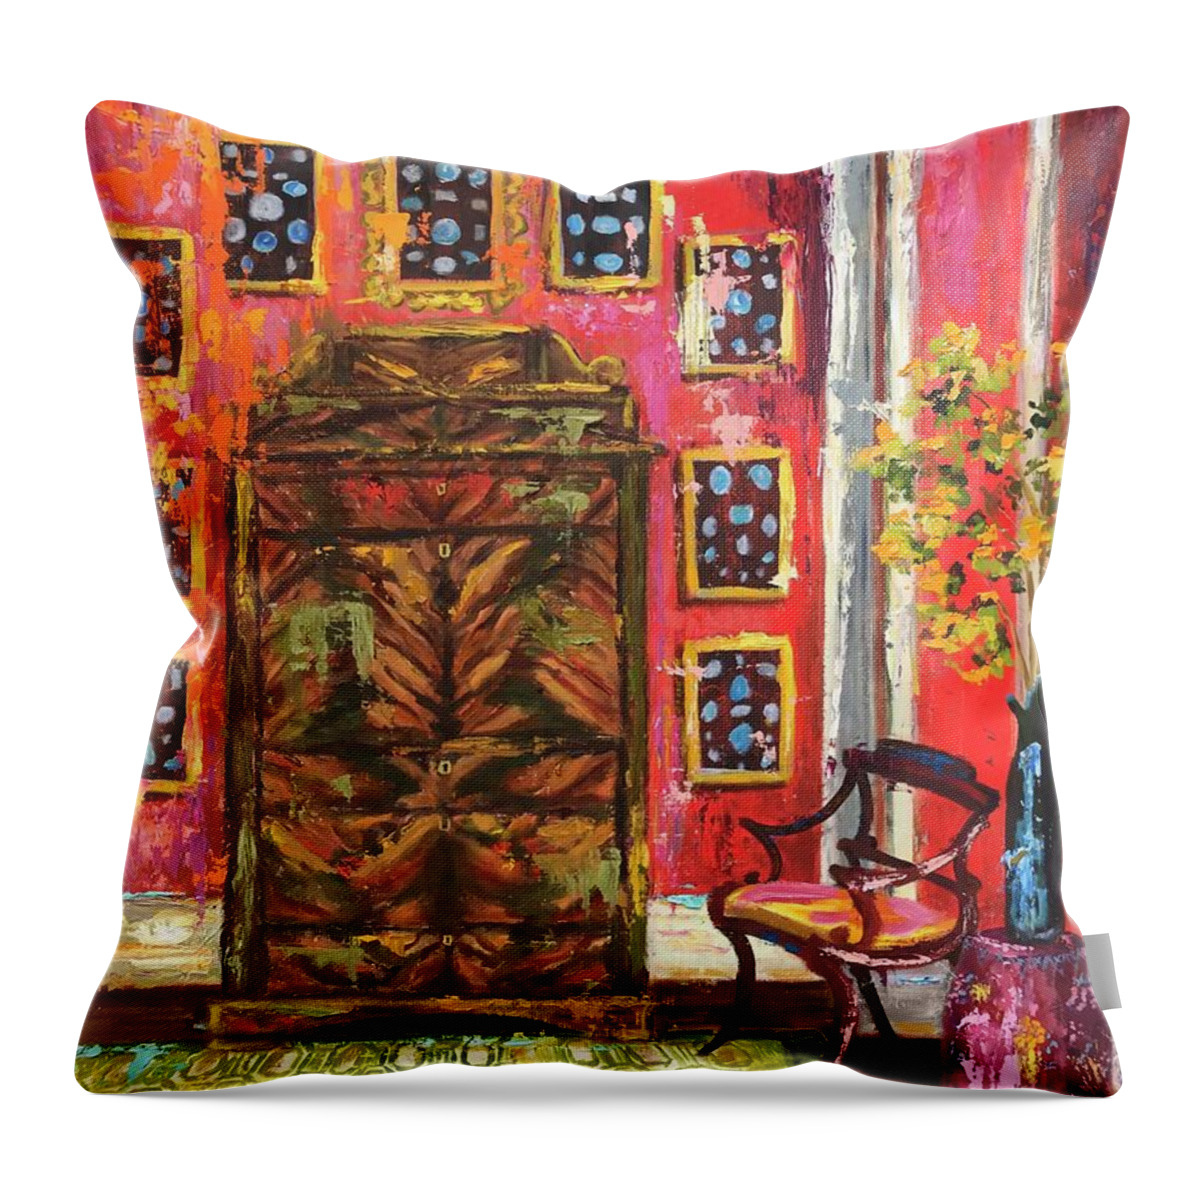 Room Throw Pillow featuring the painting The Red Room by Sherrell Rodgers